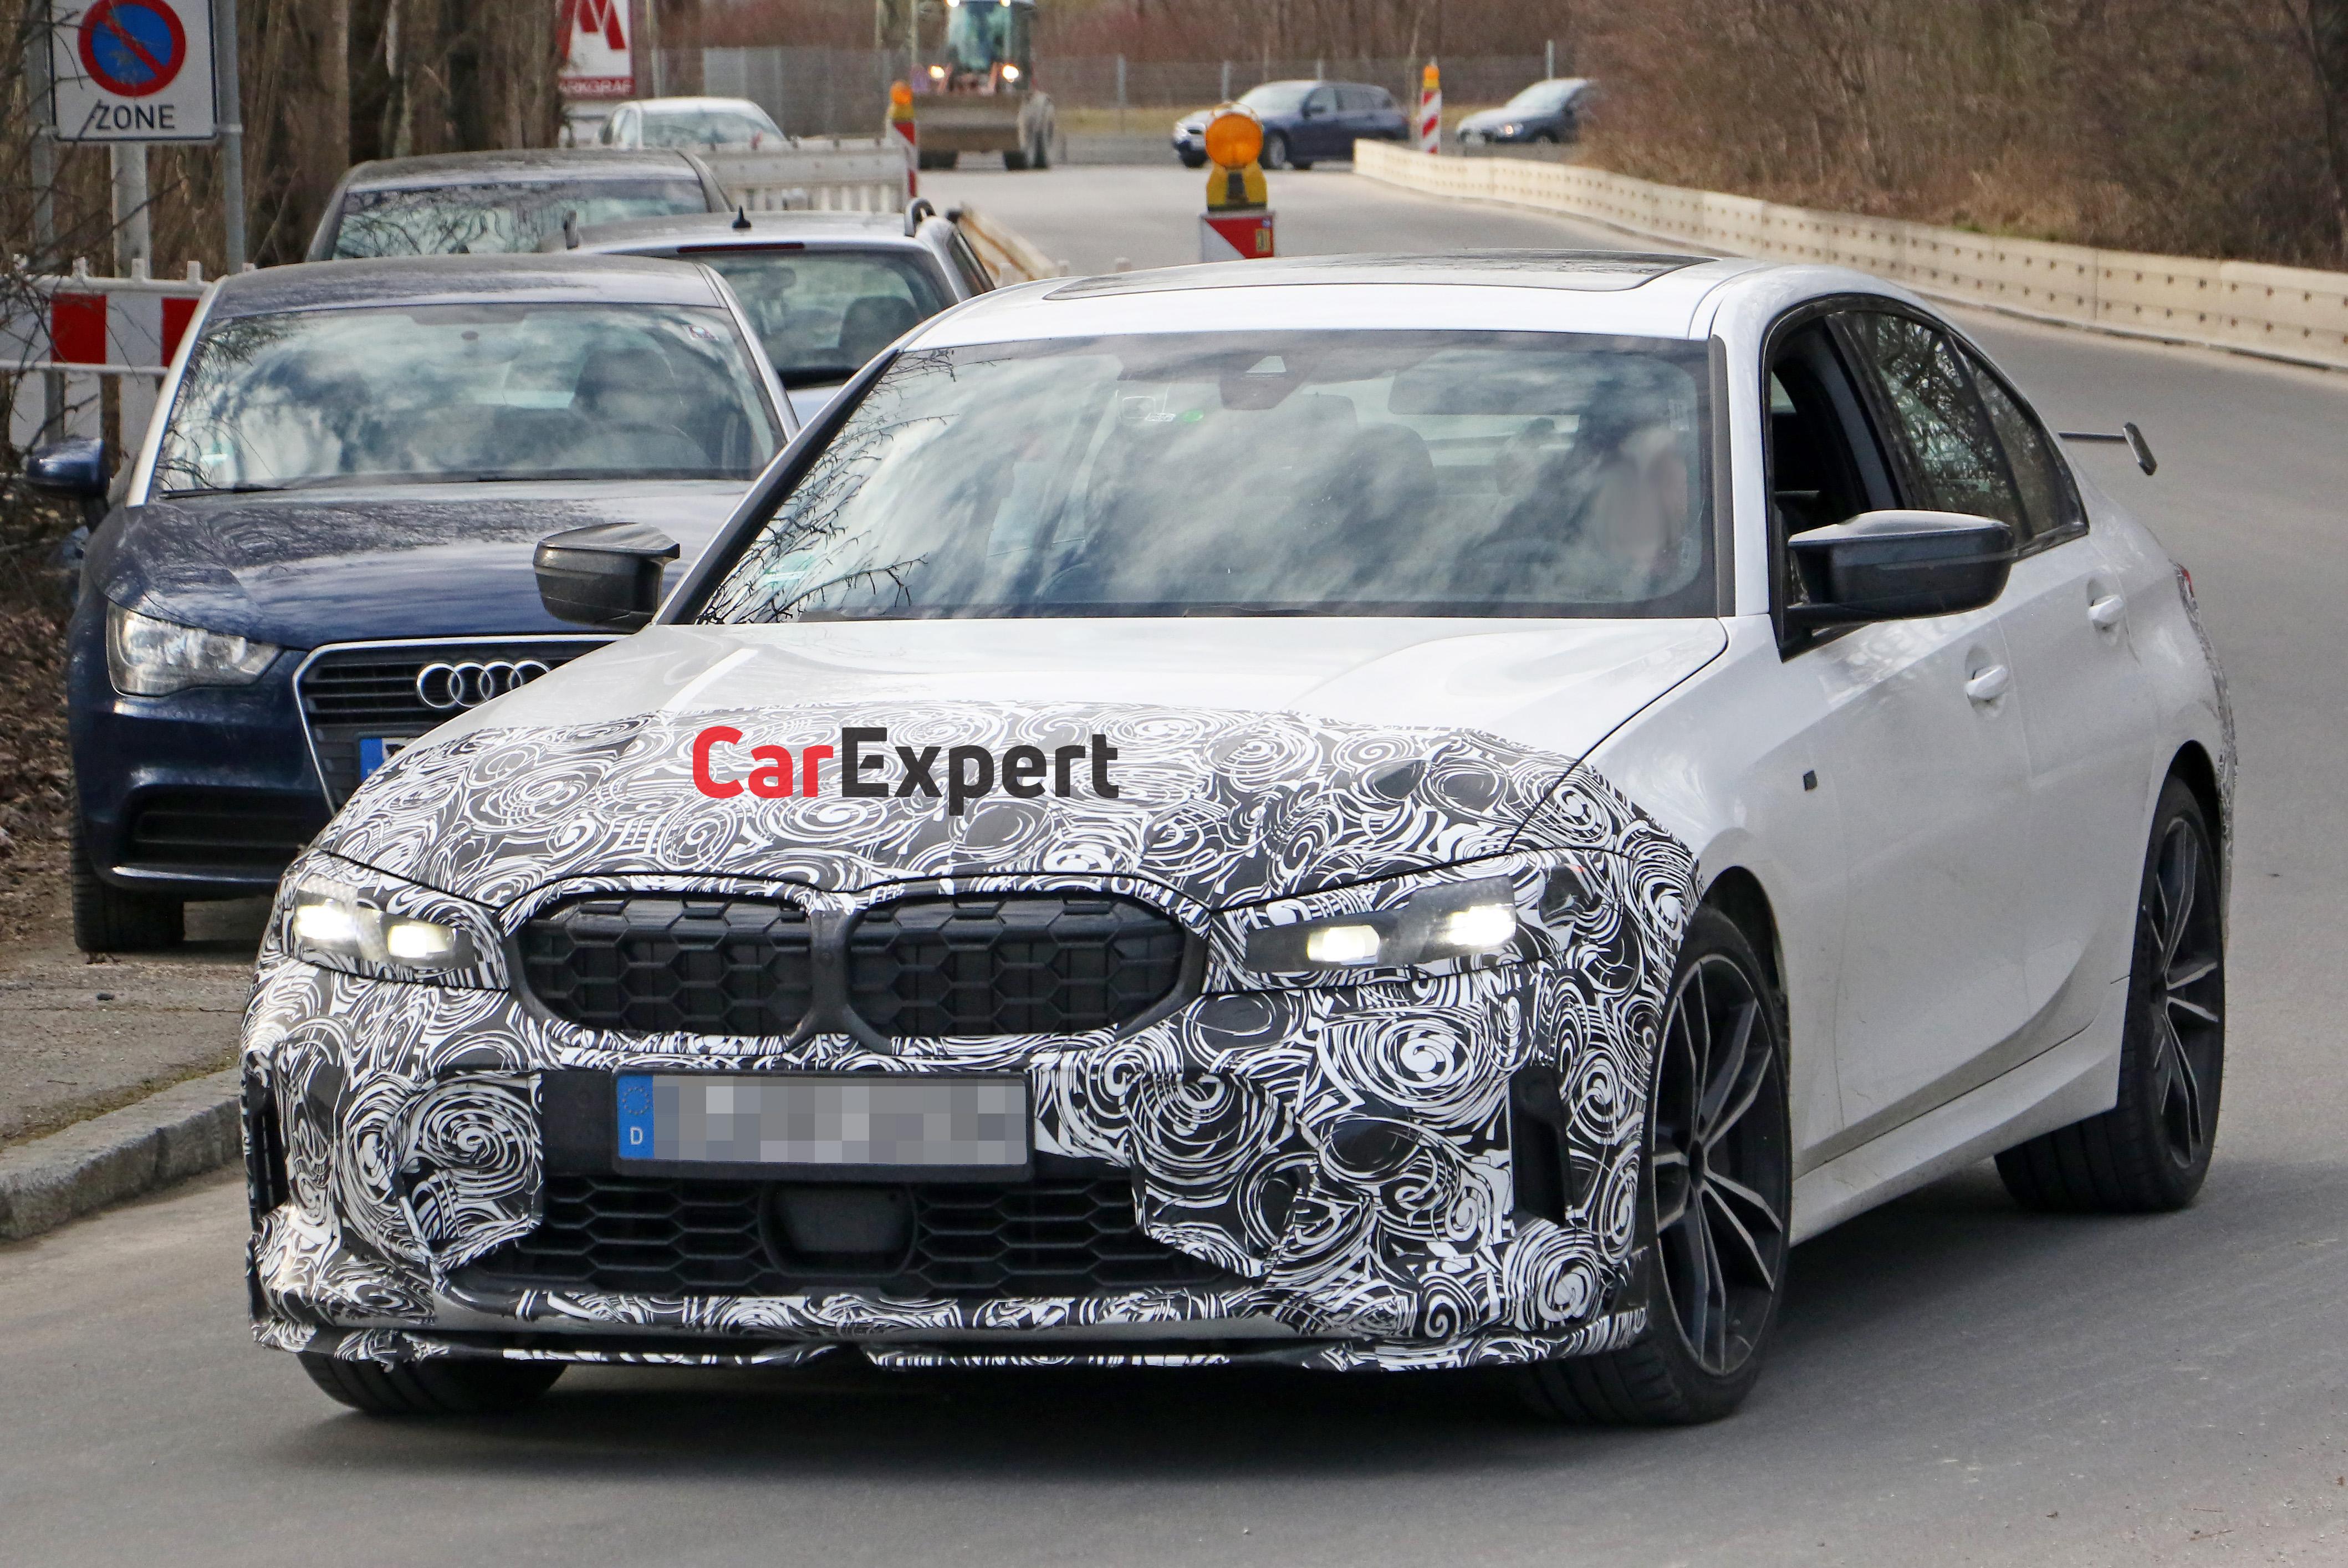 New 2022 BMW 3 Series facelift gets fresh face and improved tech